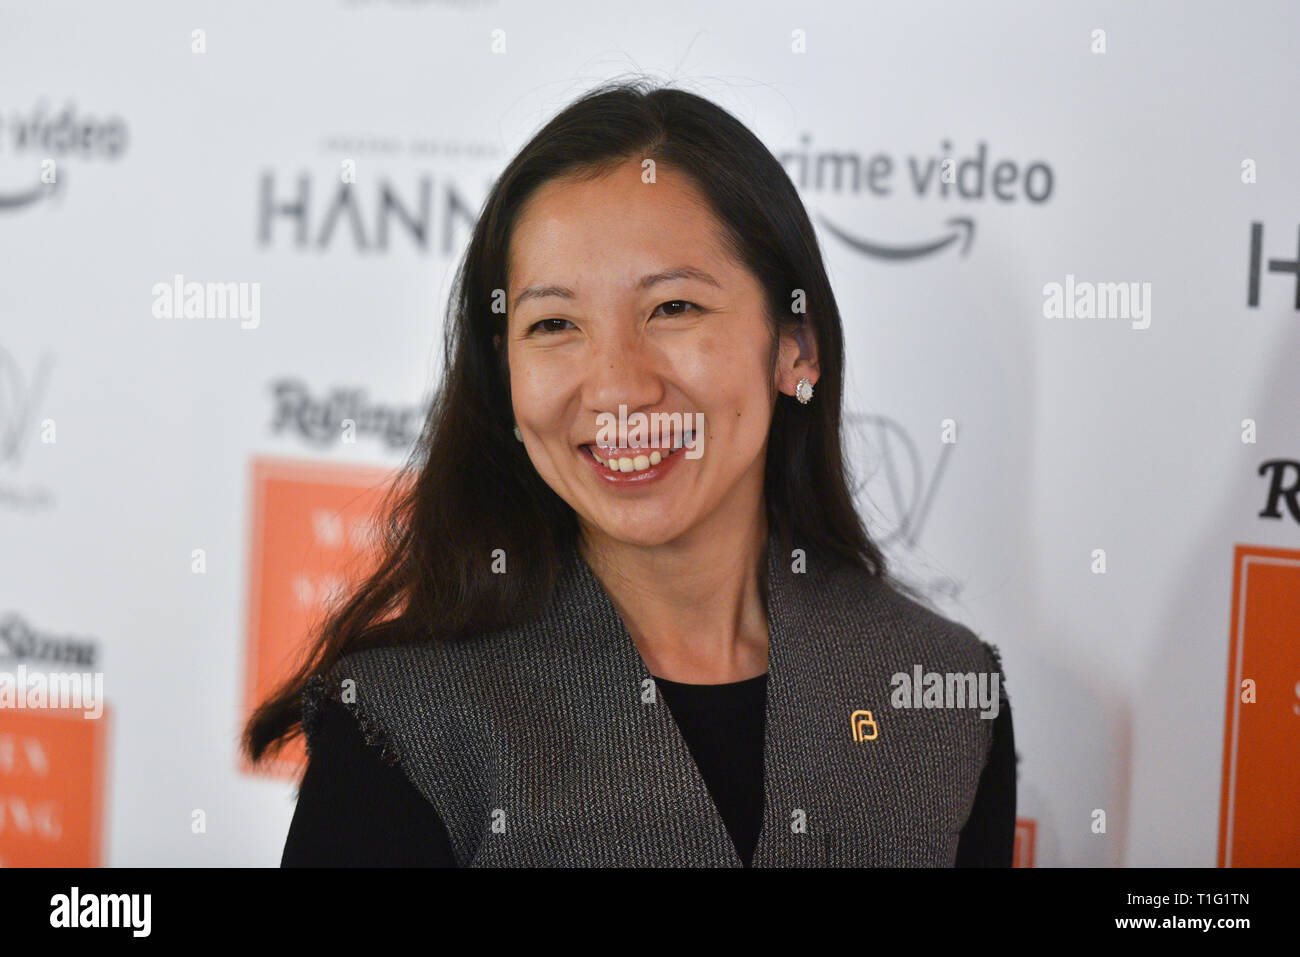 Leana Wen attends the Rolling Stone's Women Shaping The Future Brunch at the Altman Building on March 20, 2019 in New York City. Stock Photo